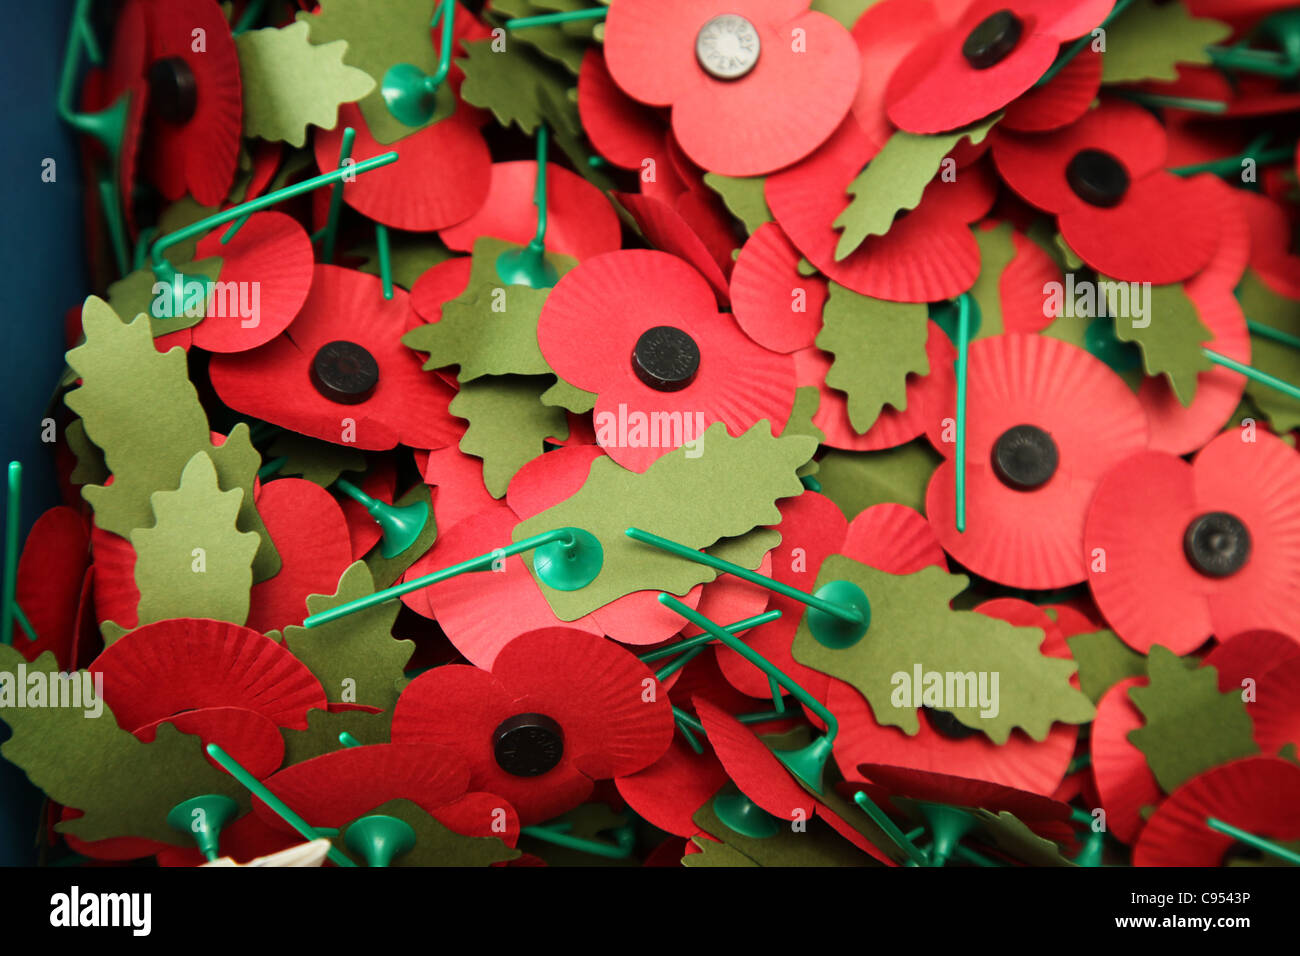 Poppies sold to mark Remembrance Sunday in Britain Stock Photo